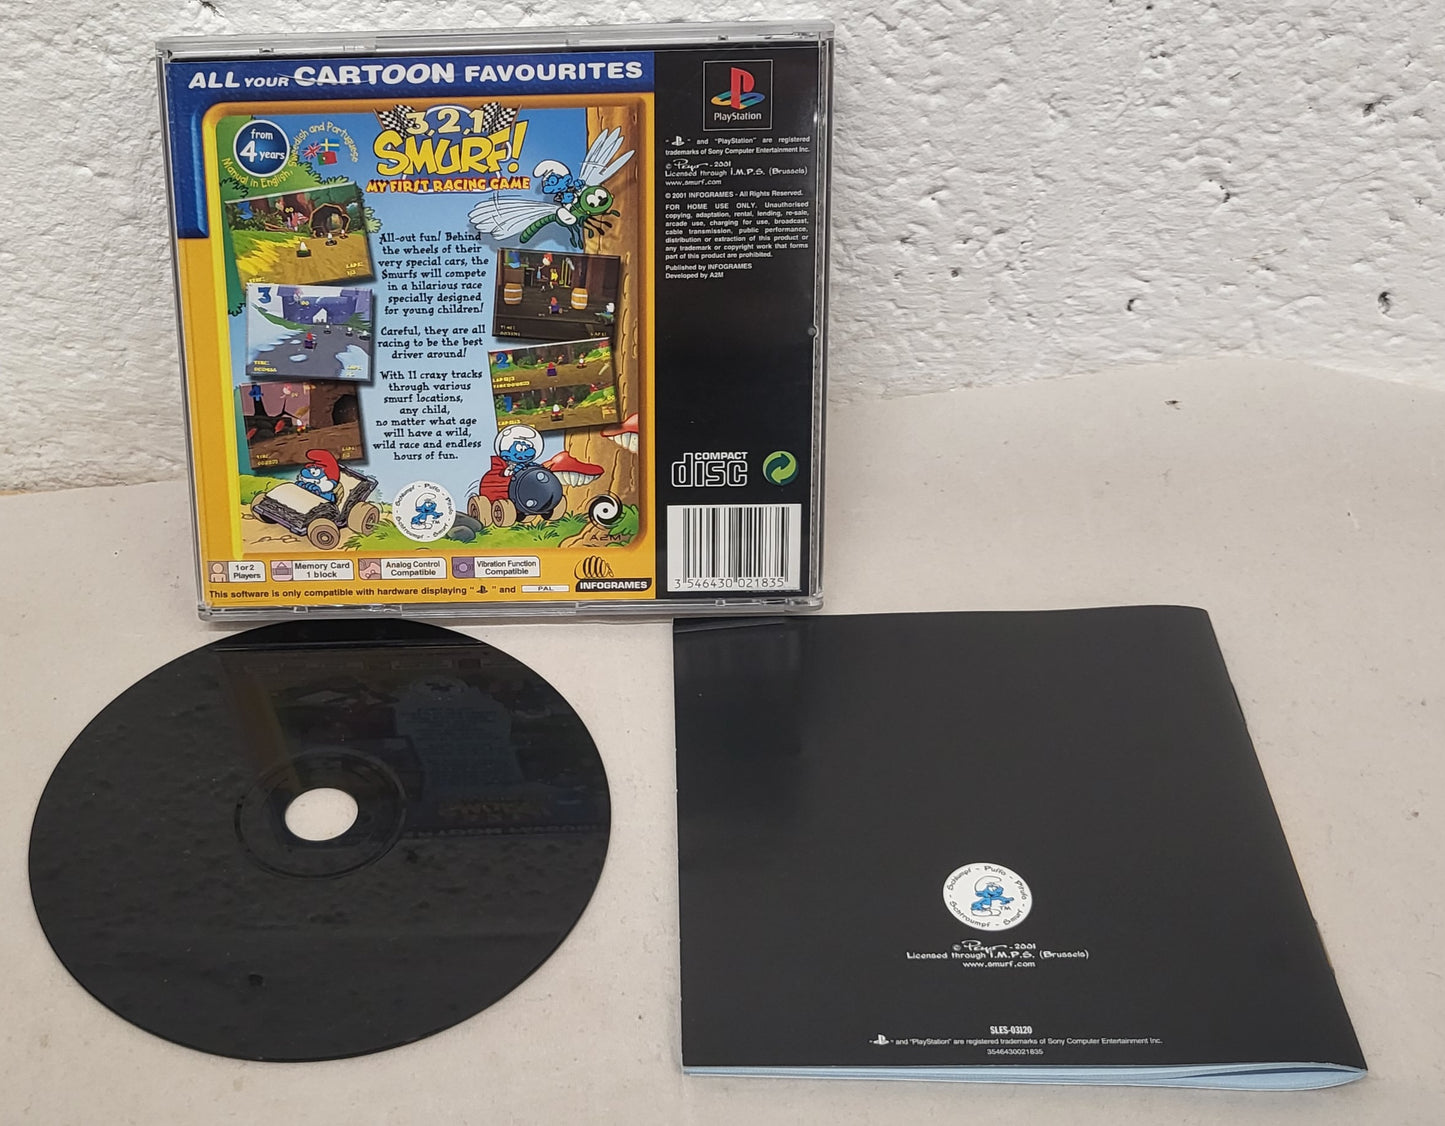 3. 2. 1. Smurf Sony Playstation 1 (PS1) Game